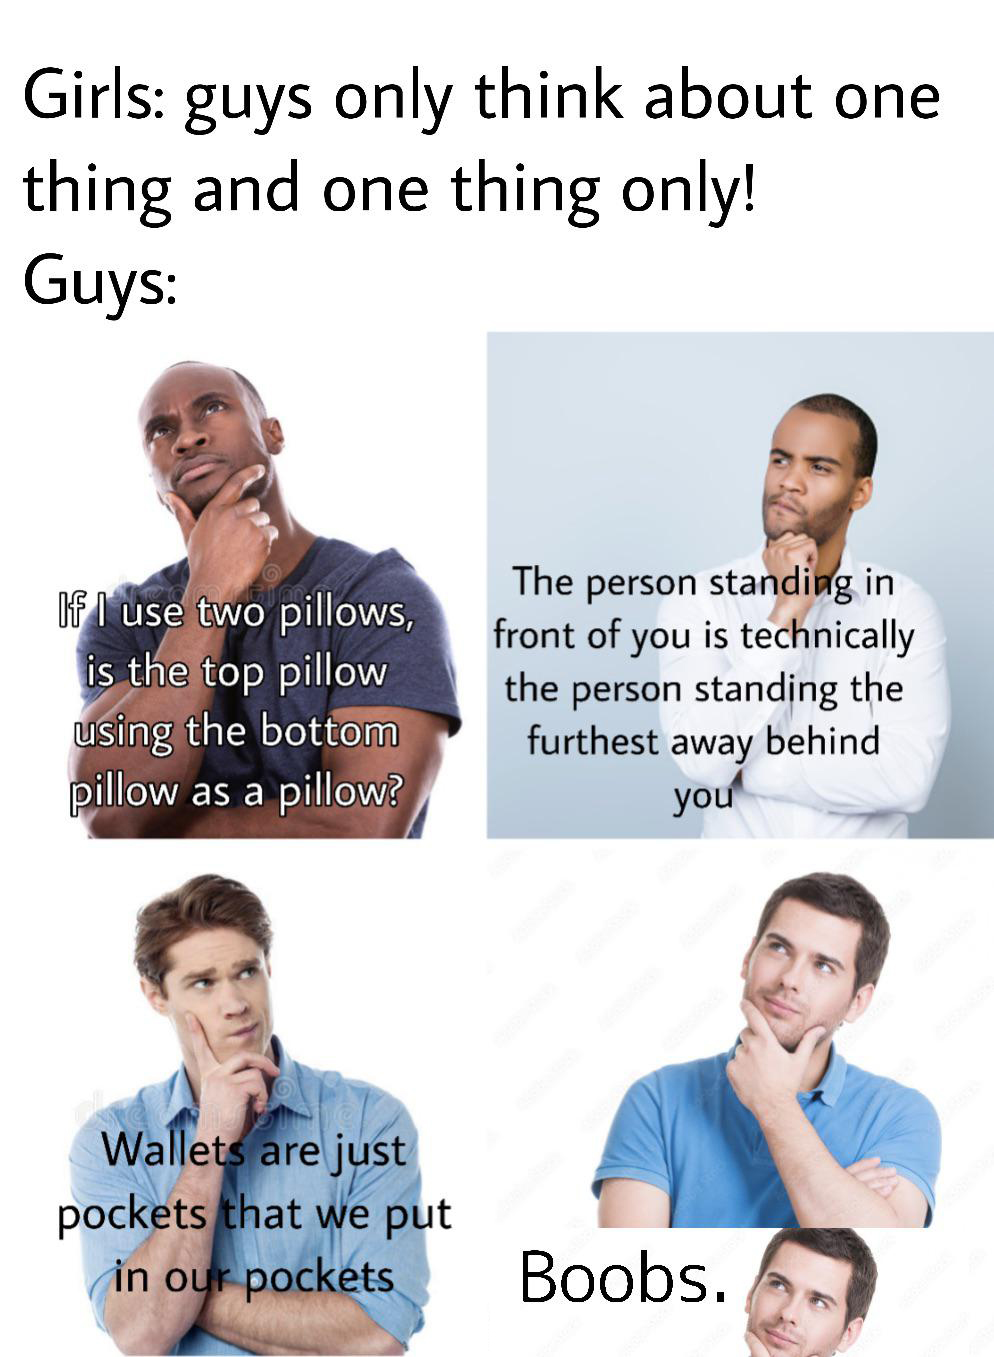 dank memes - funny memes - man - Girls guys only think about one thing and one thing only! Guys Te If I use two pillows, is the top pillow using the bottom pillow as a pillow? The person standing in front of you is technically the person standing the furt